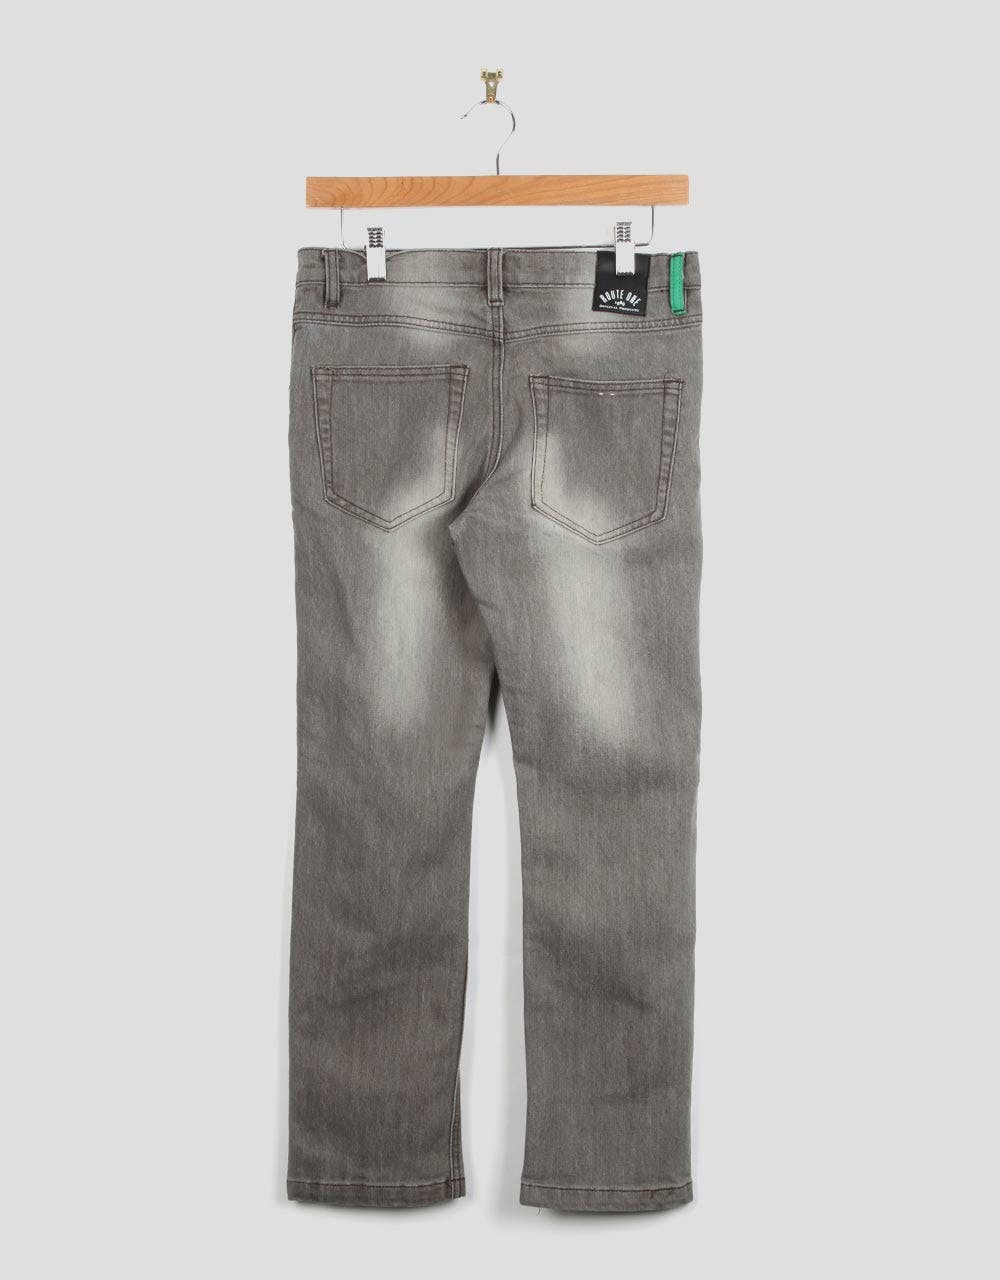 Route One Slim Fit Kids Jeans - Washed Grey